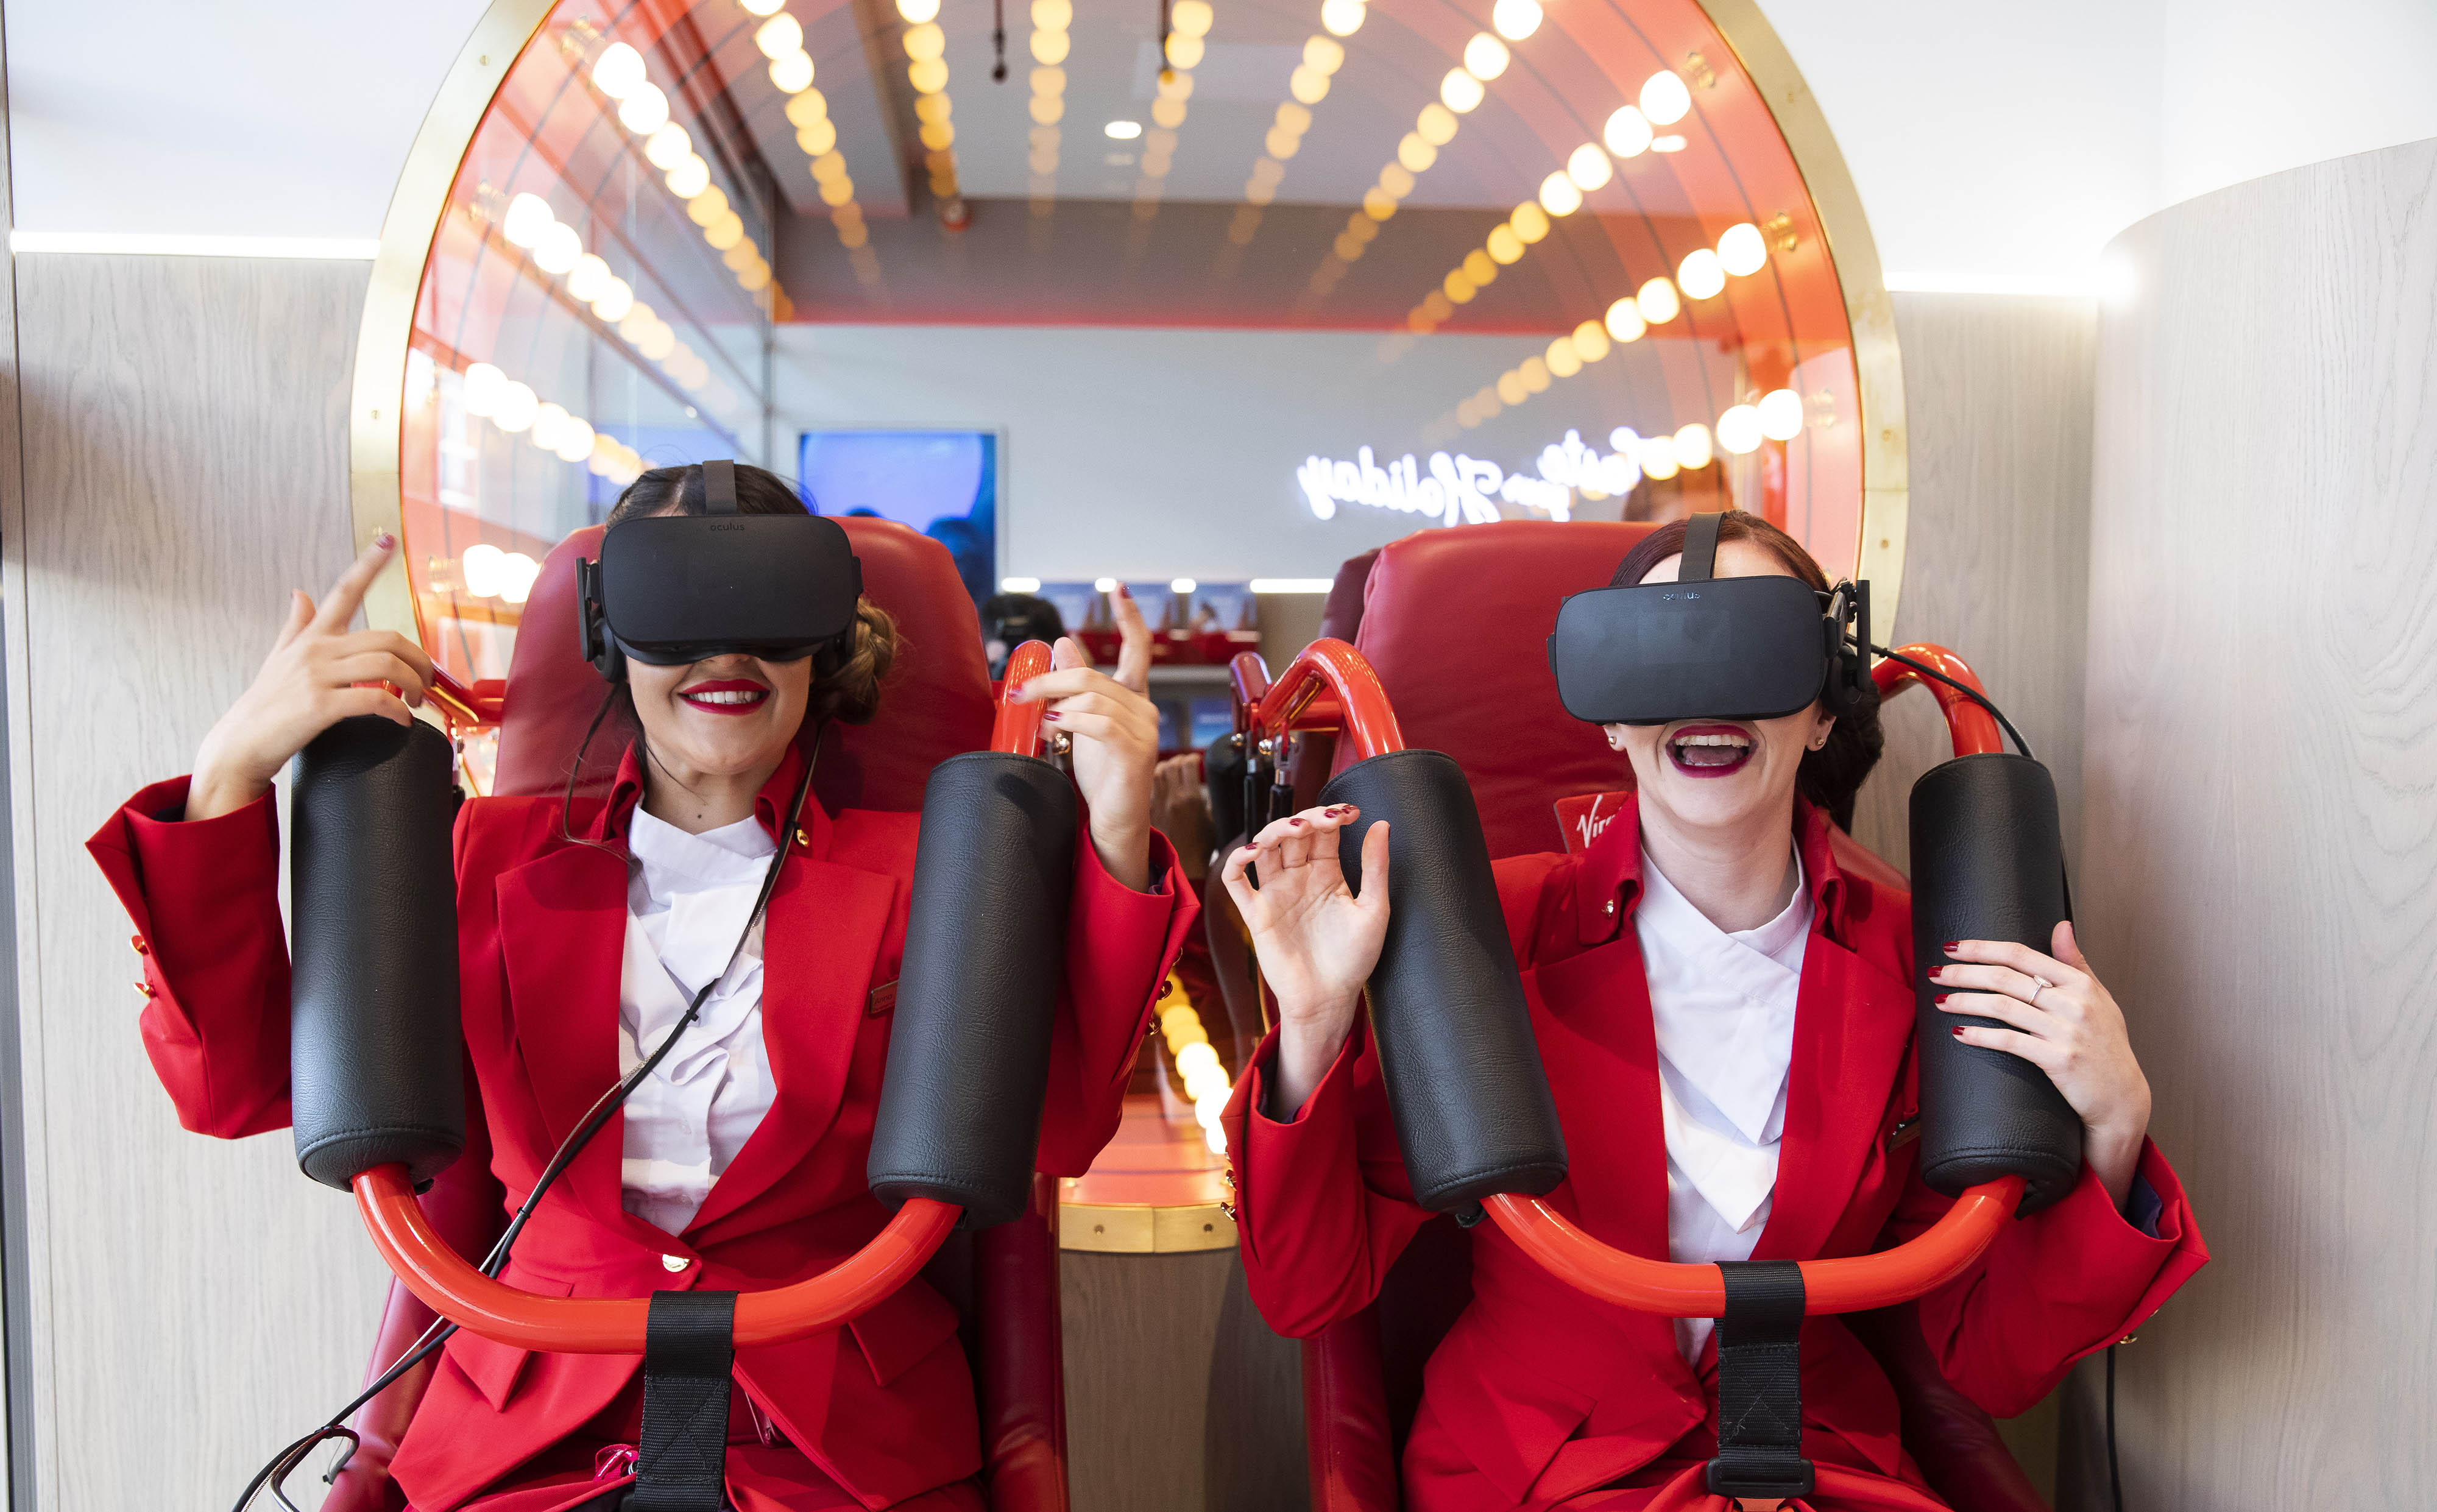 Two Virgin Holidays employees try out the virtual reality rollercoaster at Virgin Holidays V-Room